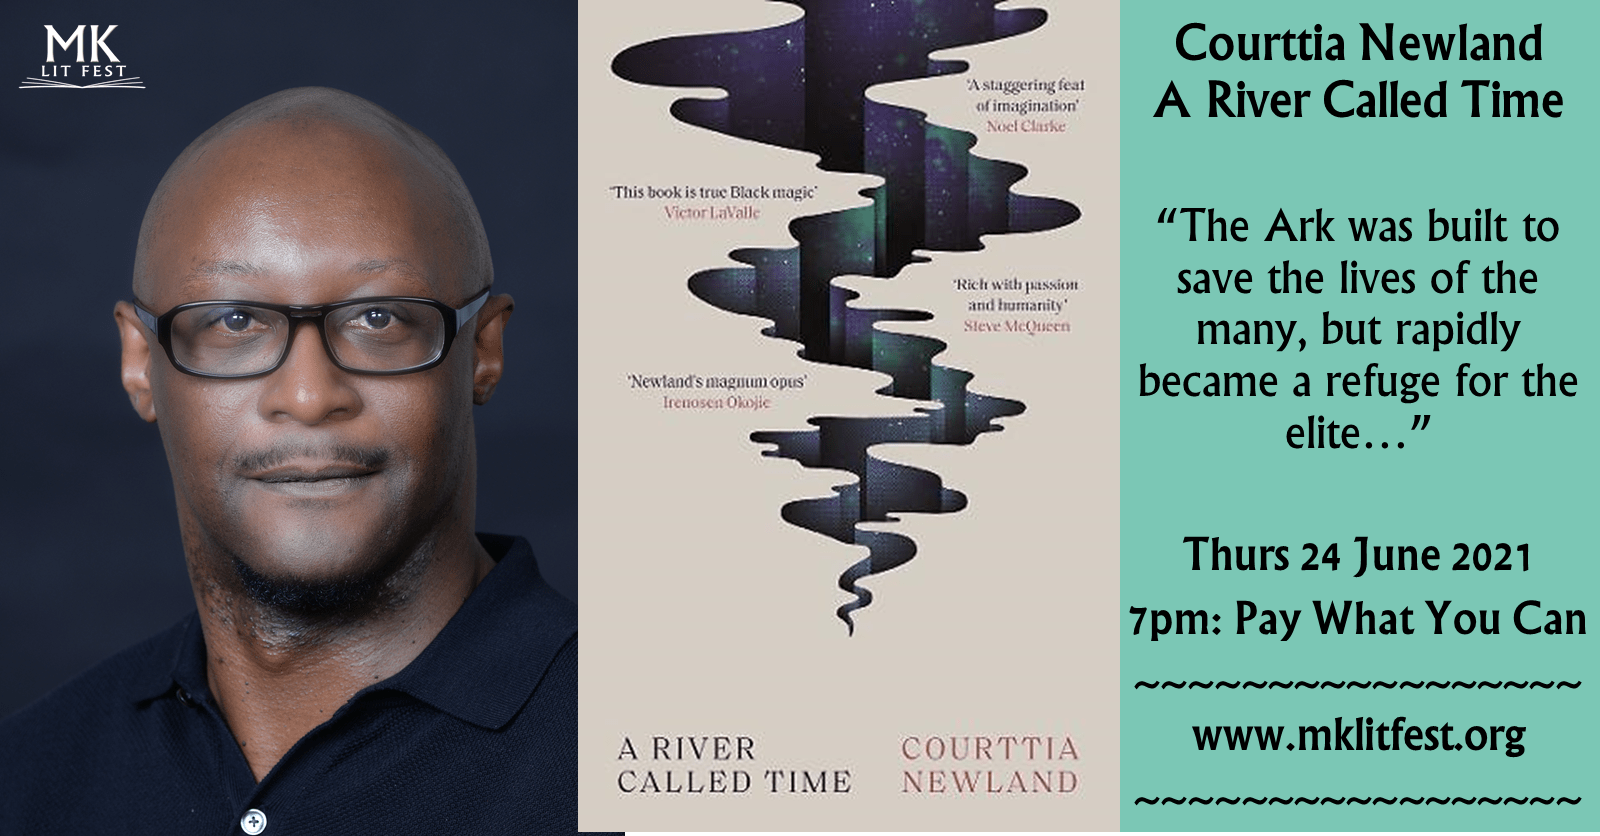 MK Lit Fest talks to Courttia Newland about his book: A River Called Time Top Image